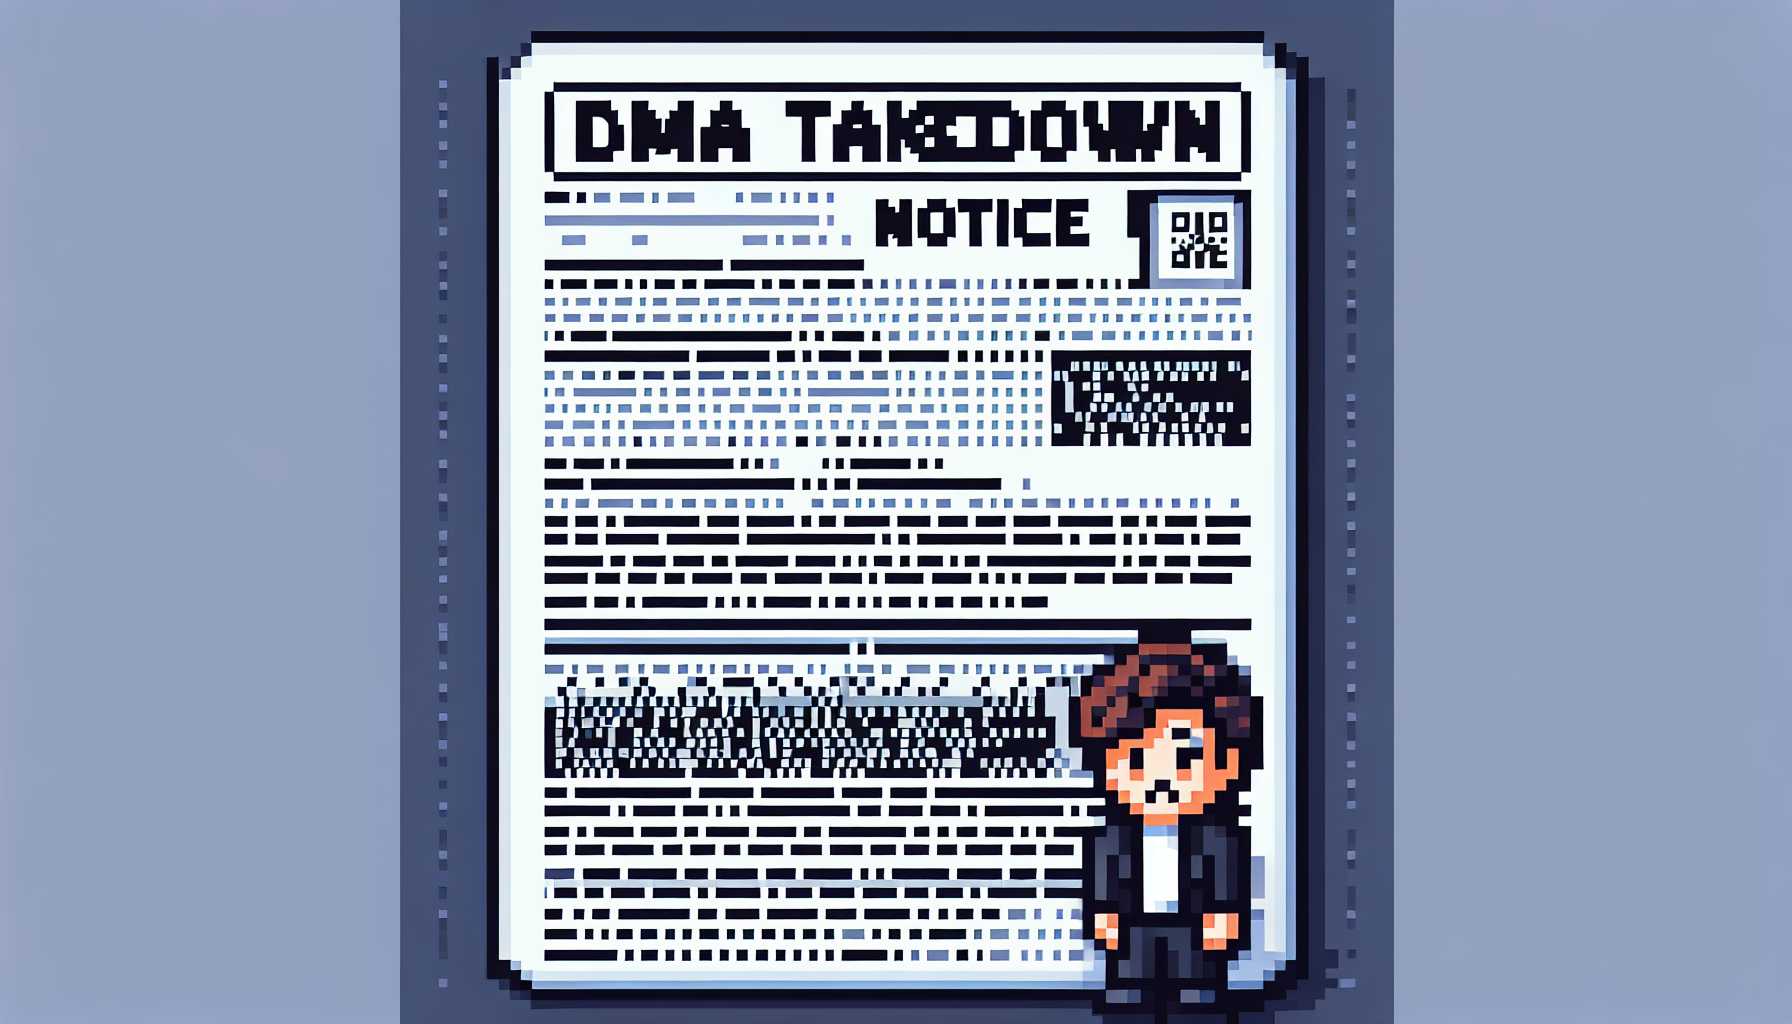 a visual representation of a DMCA takedown notice in pixel art